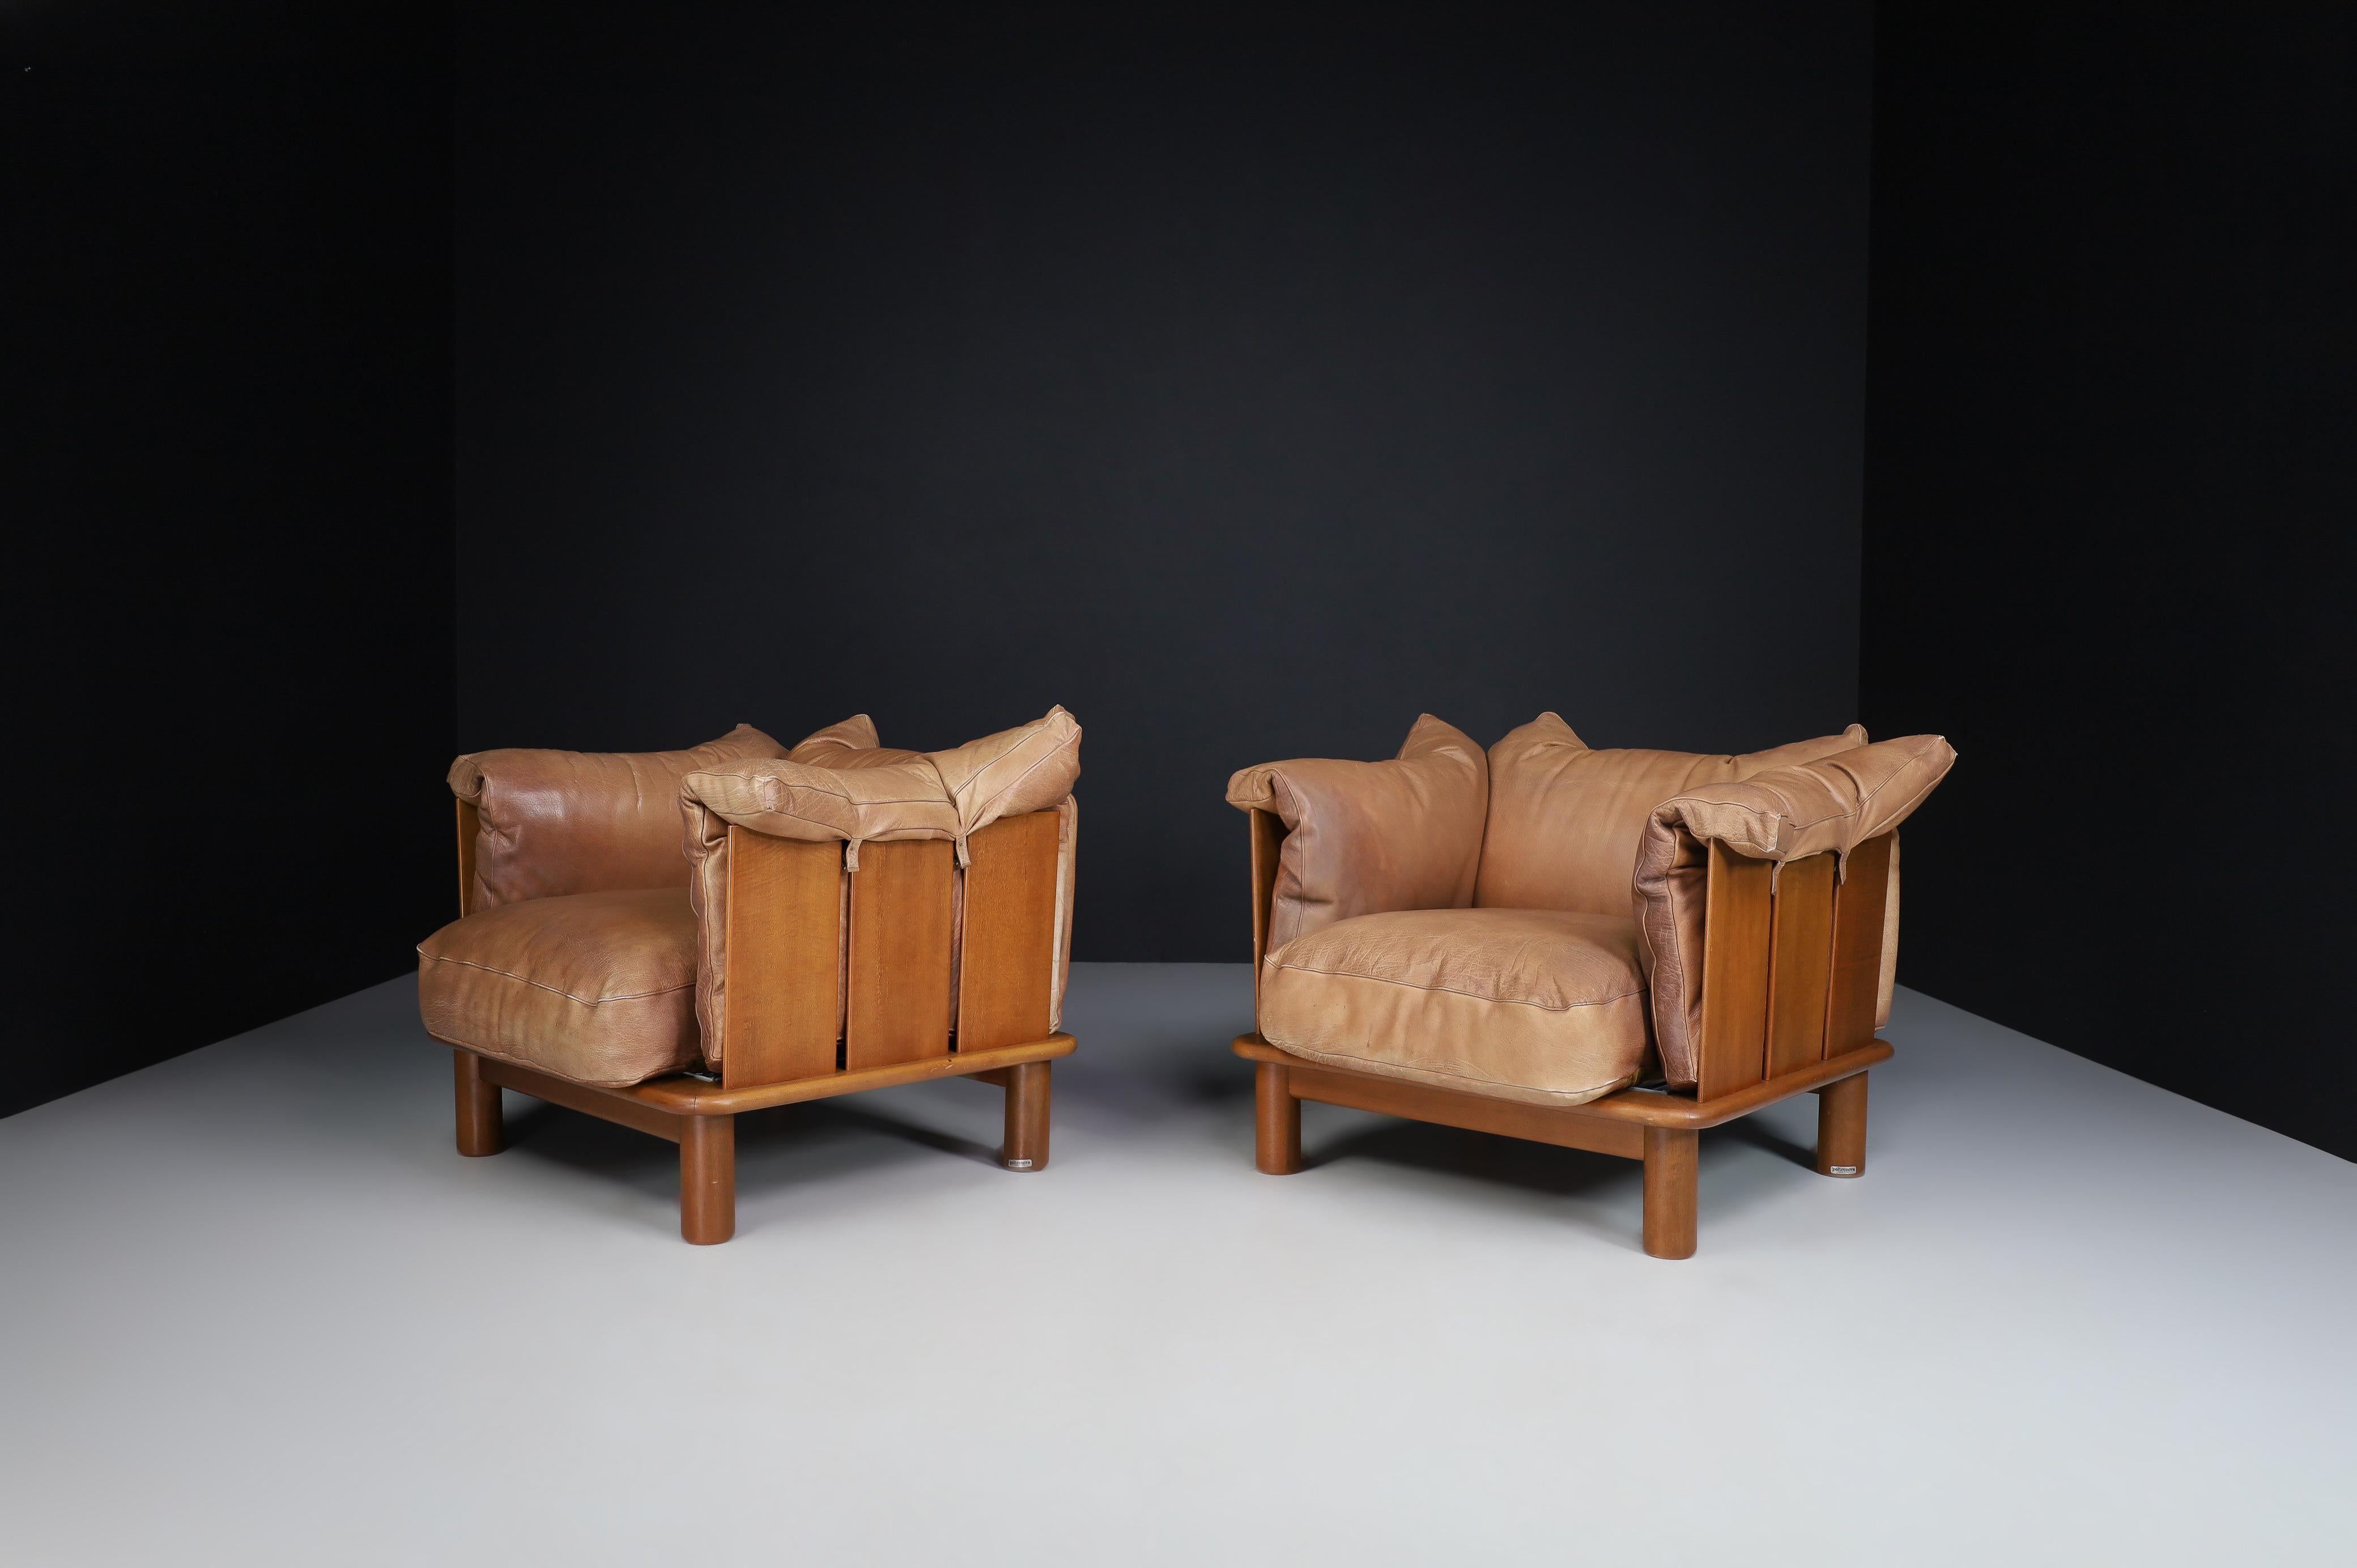 Italian Brown Leather and Walnut Lounge Chairs from De Pas, D'Urbino Lomazzi for Padova